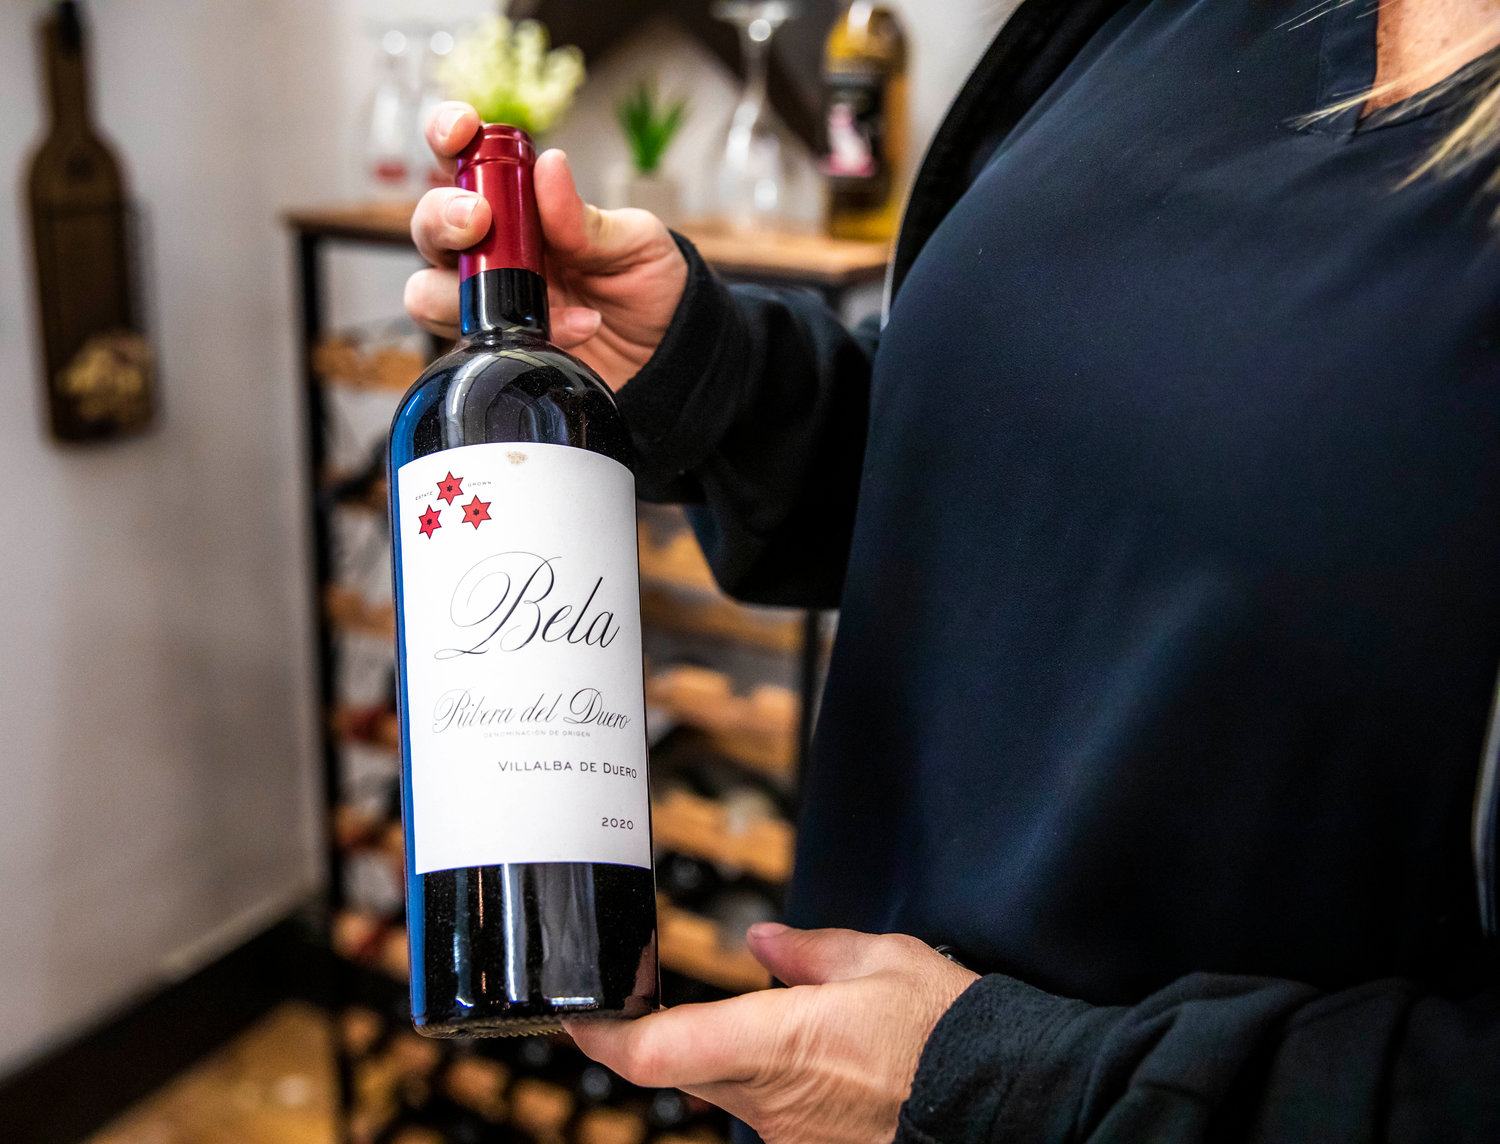 Ribera del Duero is held on display inside the Luxe Wine Bar Tuesday afternoon in downtown Centralia.